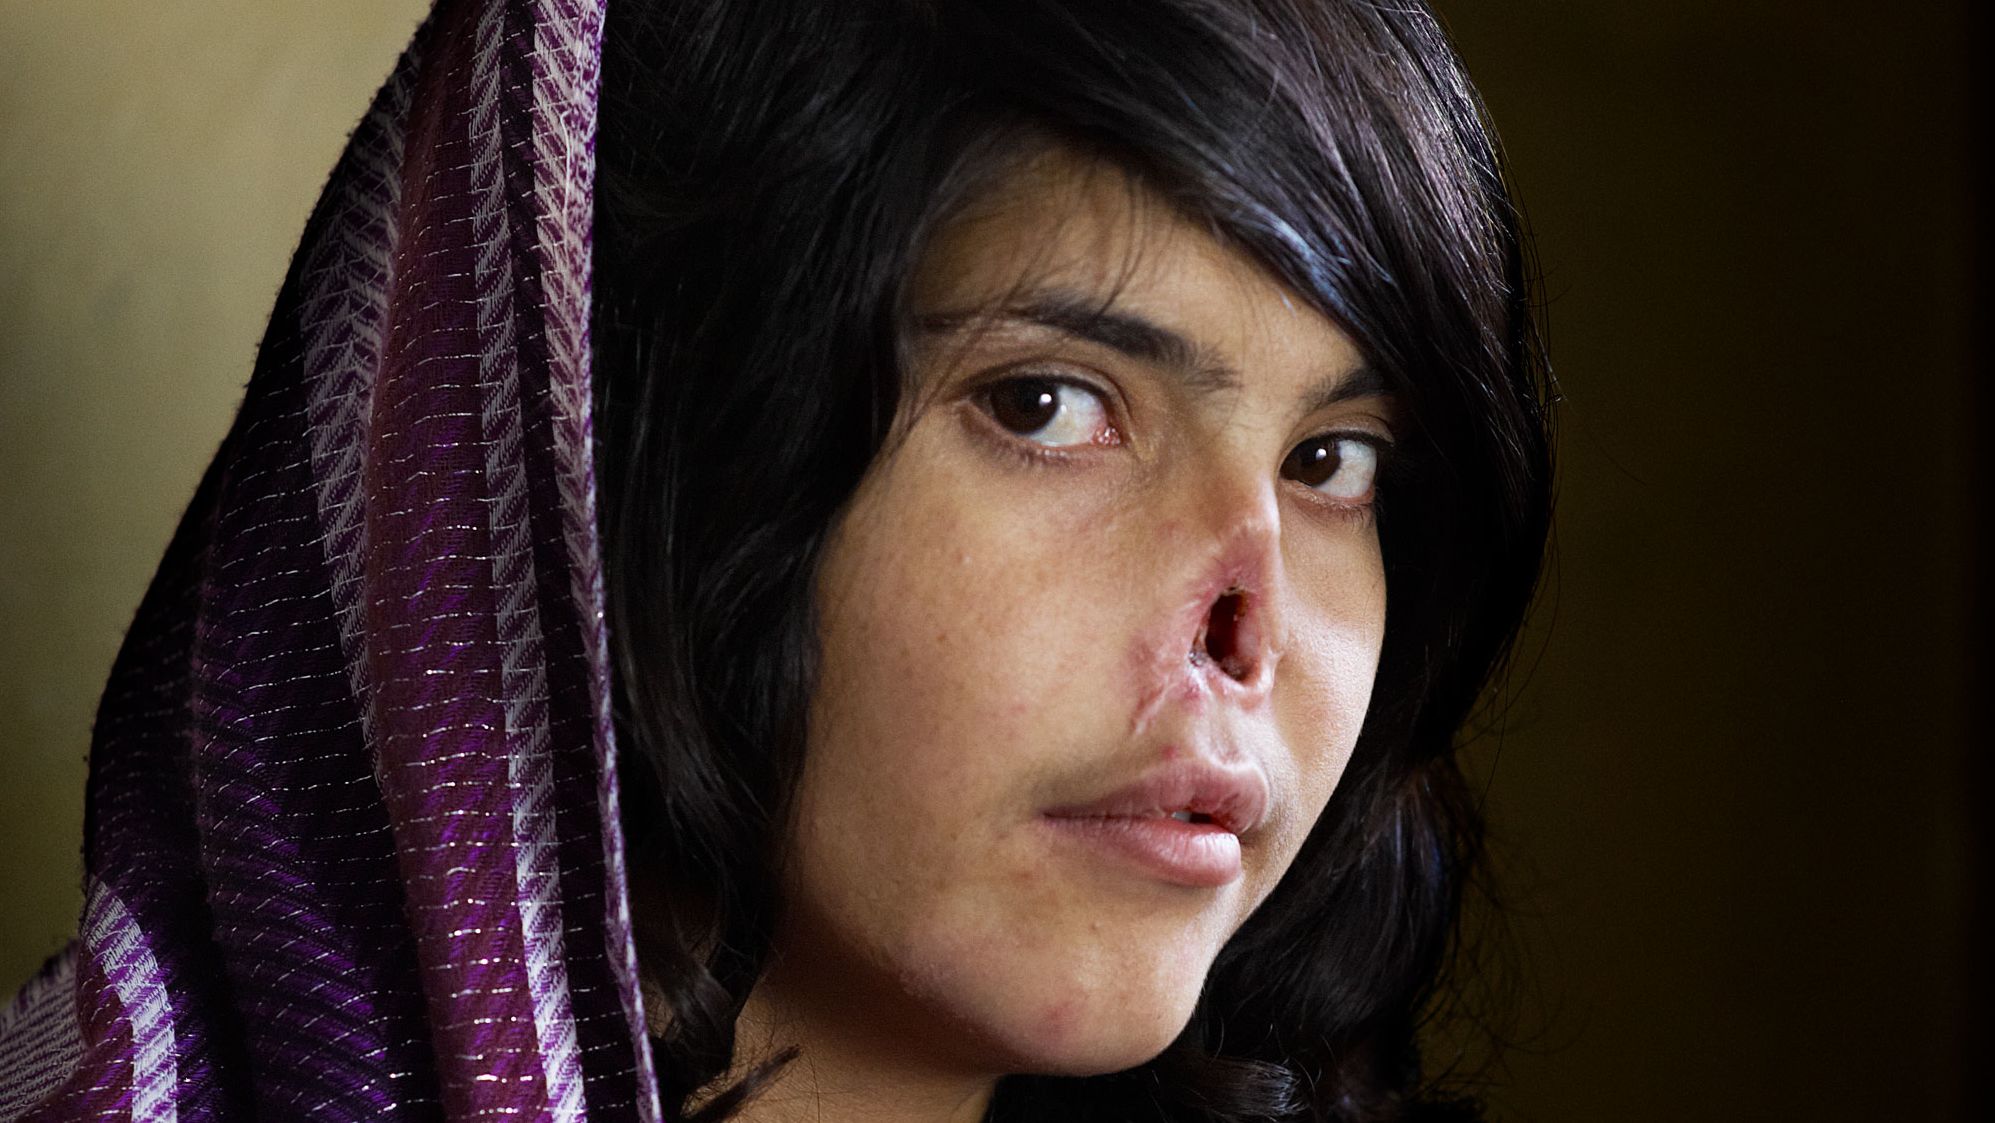 This photo of Afghan woman Aesha Mohammadzai appeared on the cover of Time magazine in August 2010. Her Taliban husband and in-laws punished her for running away by hacking off her nose and ears and leaving her for dead. <a href="https://www.cnn.com/interactive/2012/05/world/saving.aesha/index.html" target="_blank">She became a symbol</a> of the oppression of women in her war-torn country. She was flown to the United States, where she underwent multiple surgeries to reconstruct her nose.